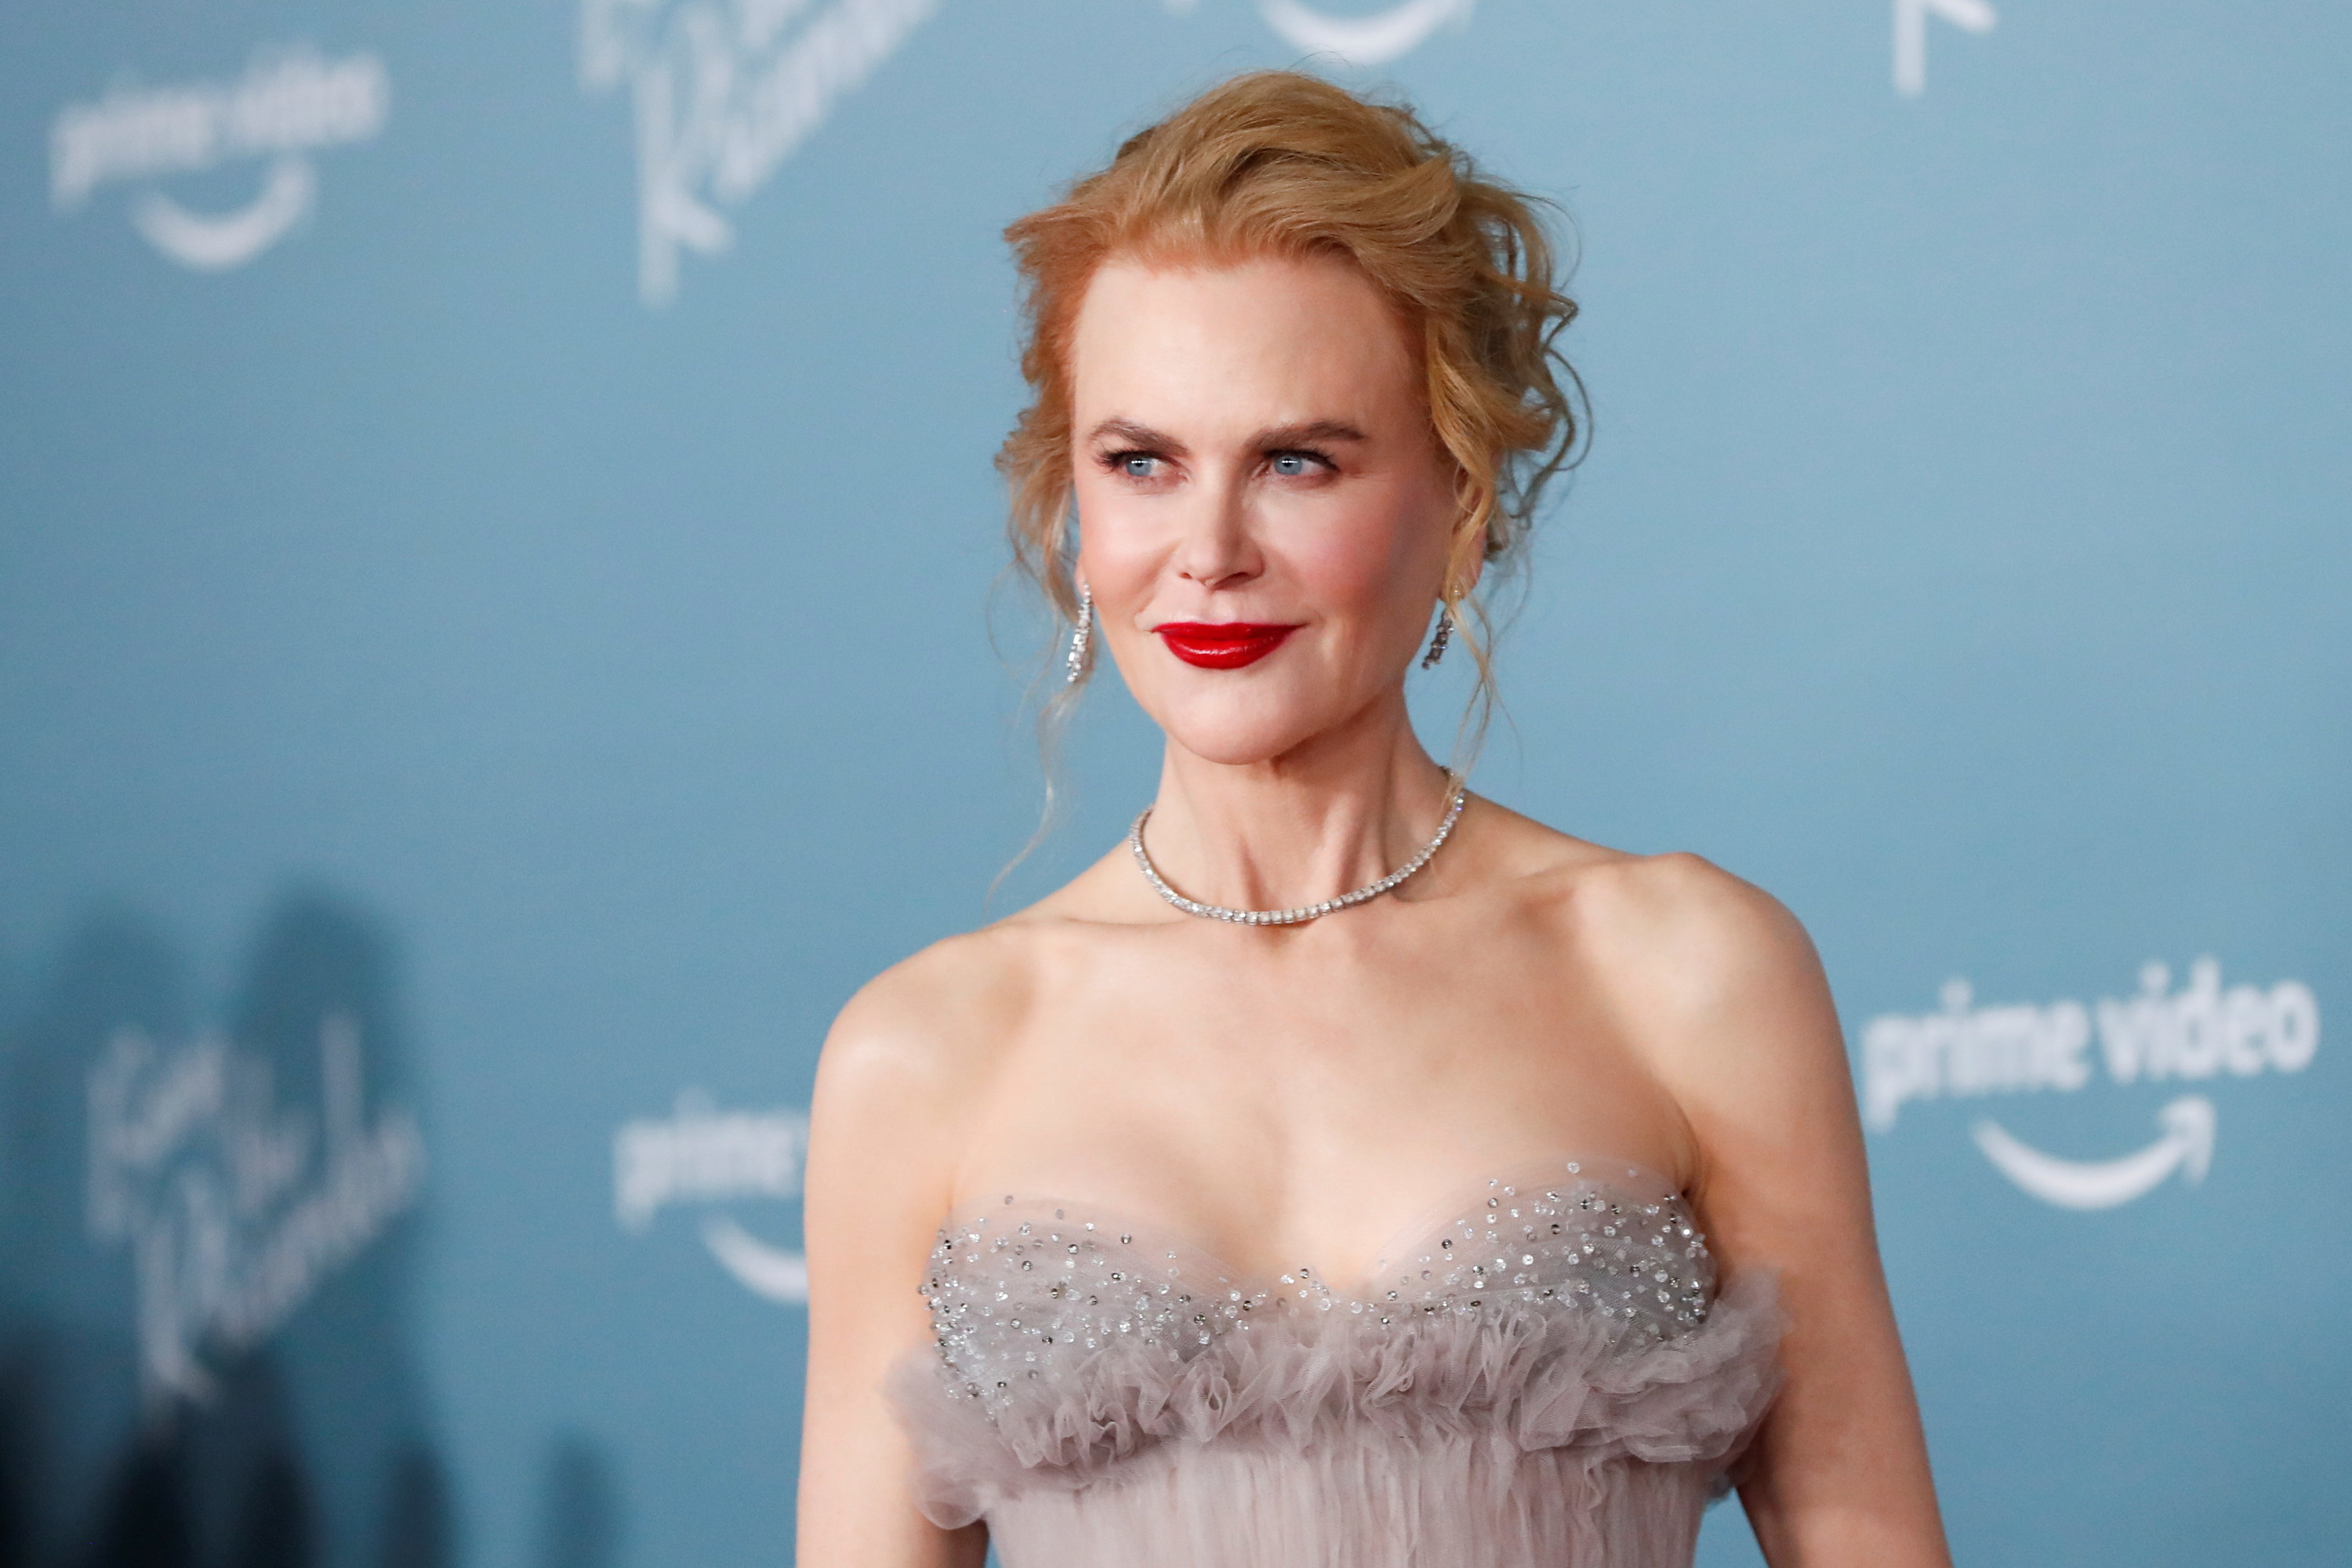 Nicole Kidman in a strapless gown and diamond necklace